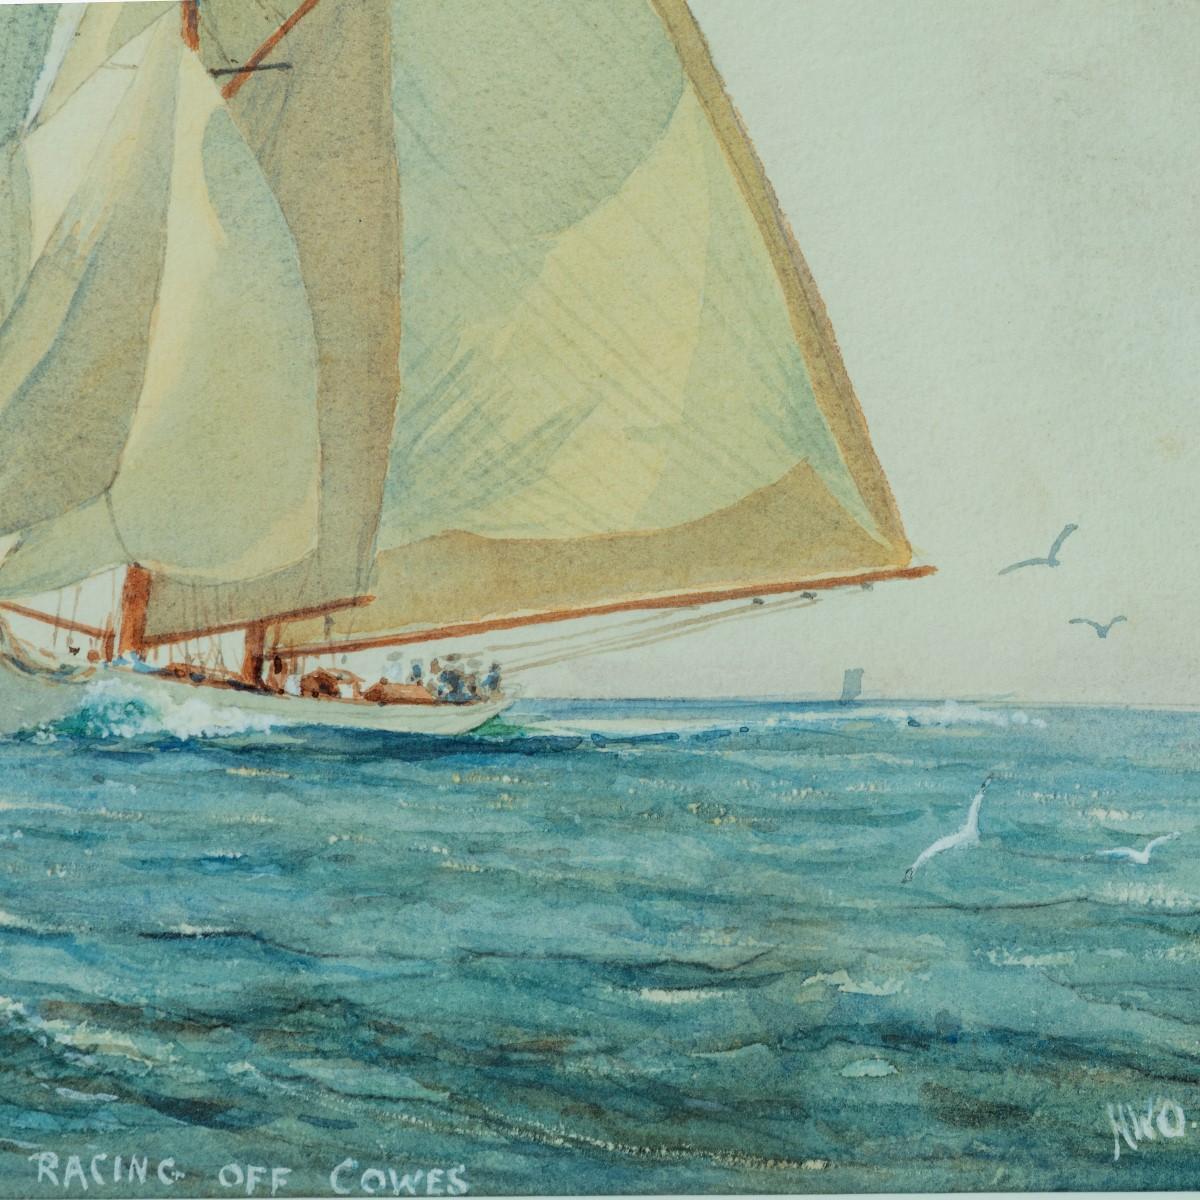 Herbert Walter Oake ‘Susanne’ racing off Cowes. A watercolour showing the yacht Susanne racing with a magnificent number of sails. Signed with initials ‘H.W.O’.

Herbert Walter Oake (1881-1939) was a painter known in Scotland for his landscapes,